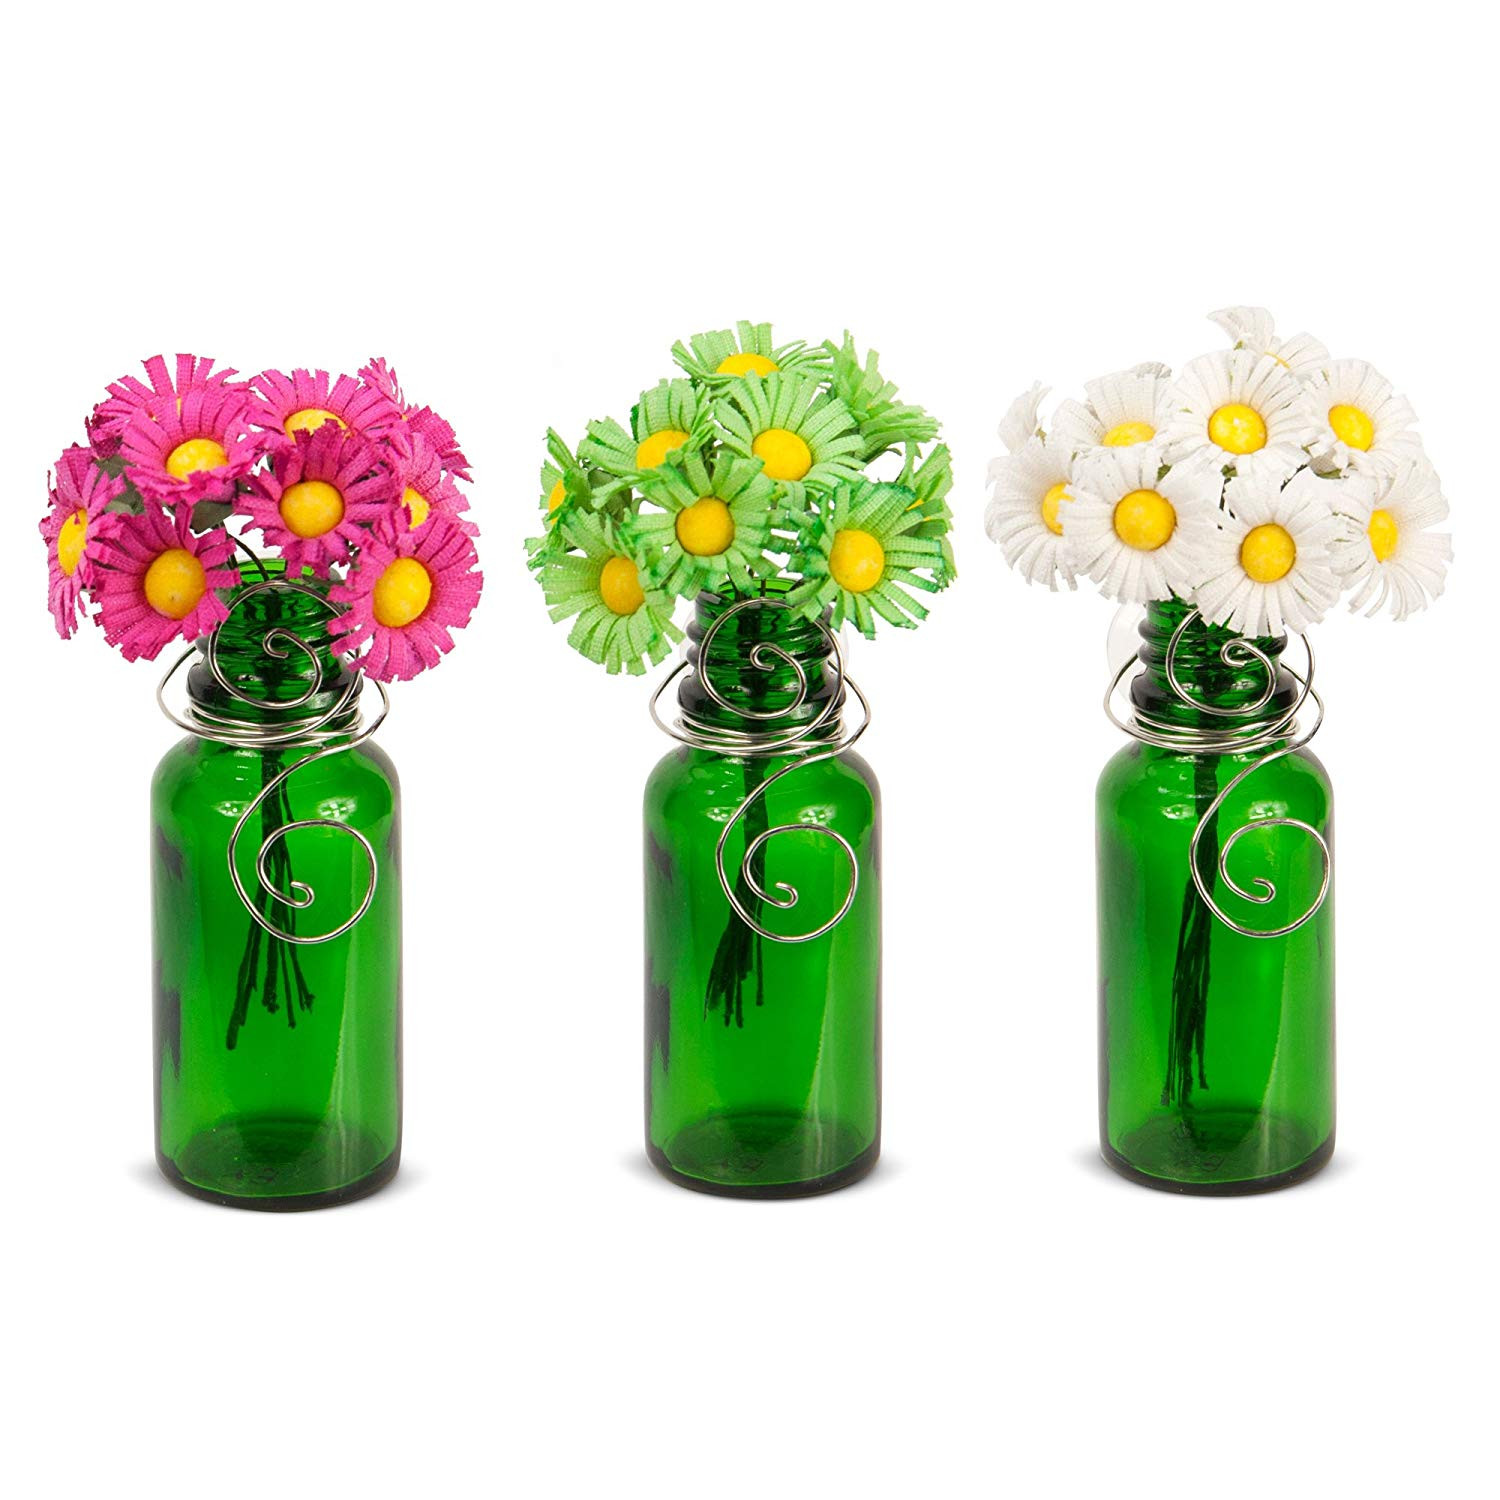 19 Stylish Green Bubble Glass Vase 2024 free download green bubble glass vase of amazon com vazzini mini vase bouquet suction cup bud bottle intended for amazon com vazzini mini vase bouquet suction cup bud bottle holder with flowers decorative